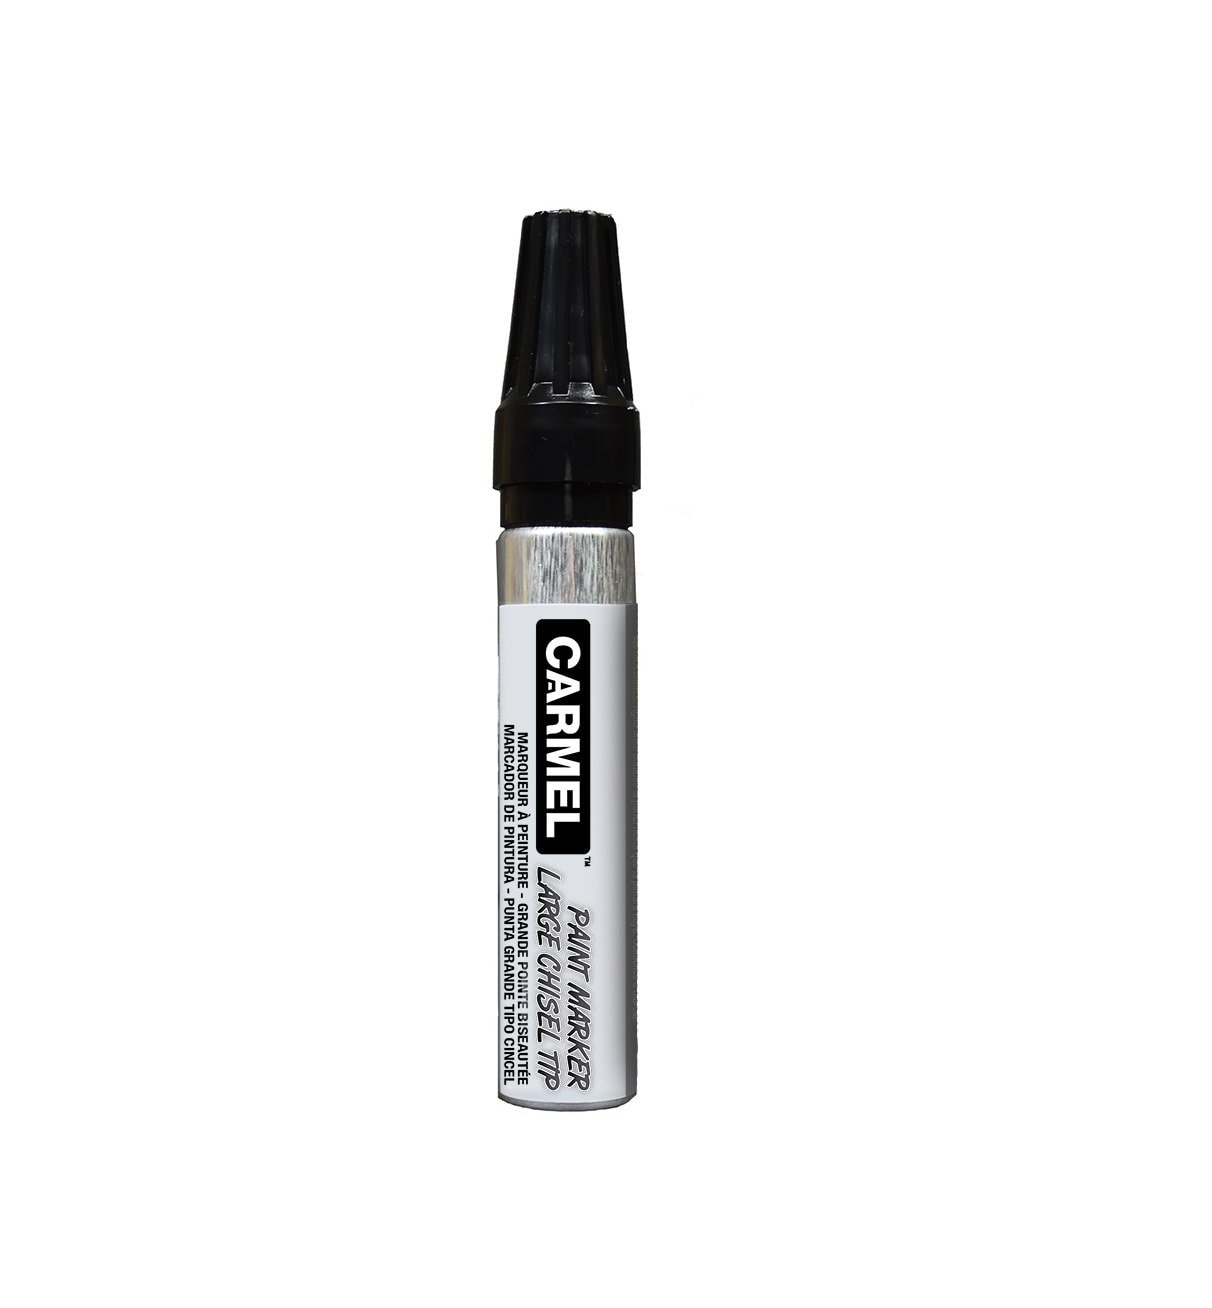 WHITE Sharpie Oil Based Paint Mark Opaque Permanent Paint Marker Medium  Point Tip Ink Mark to Glass Plastic Leather Wood Stone 35558 